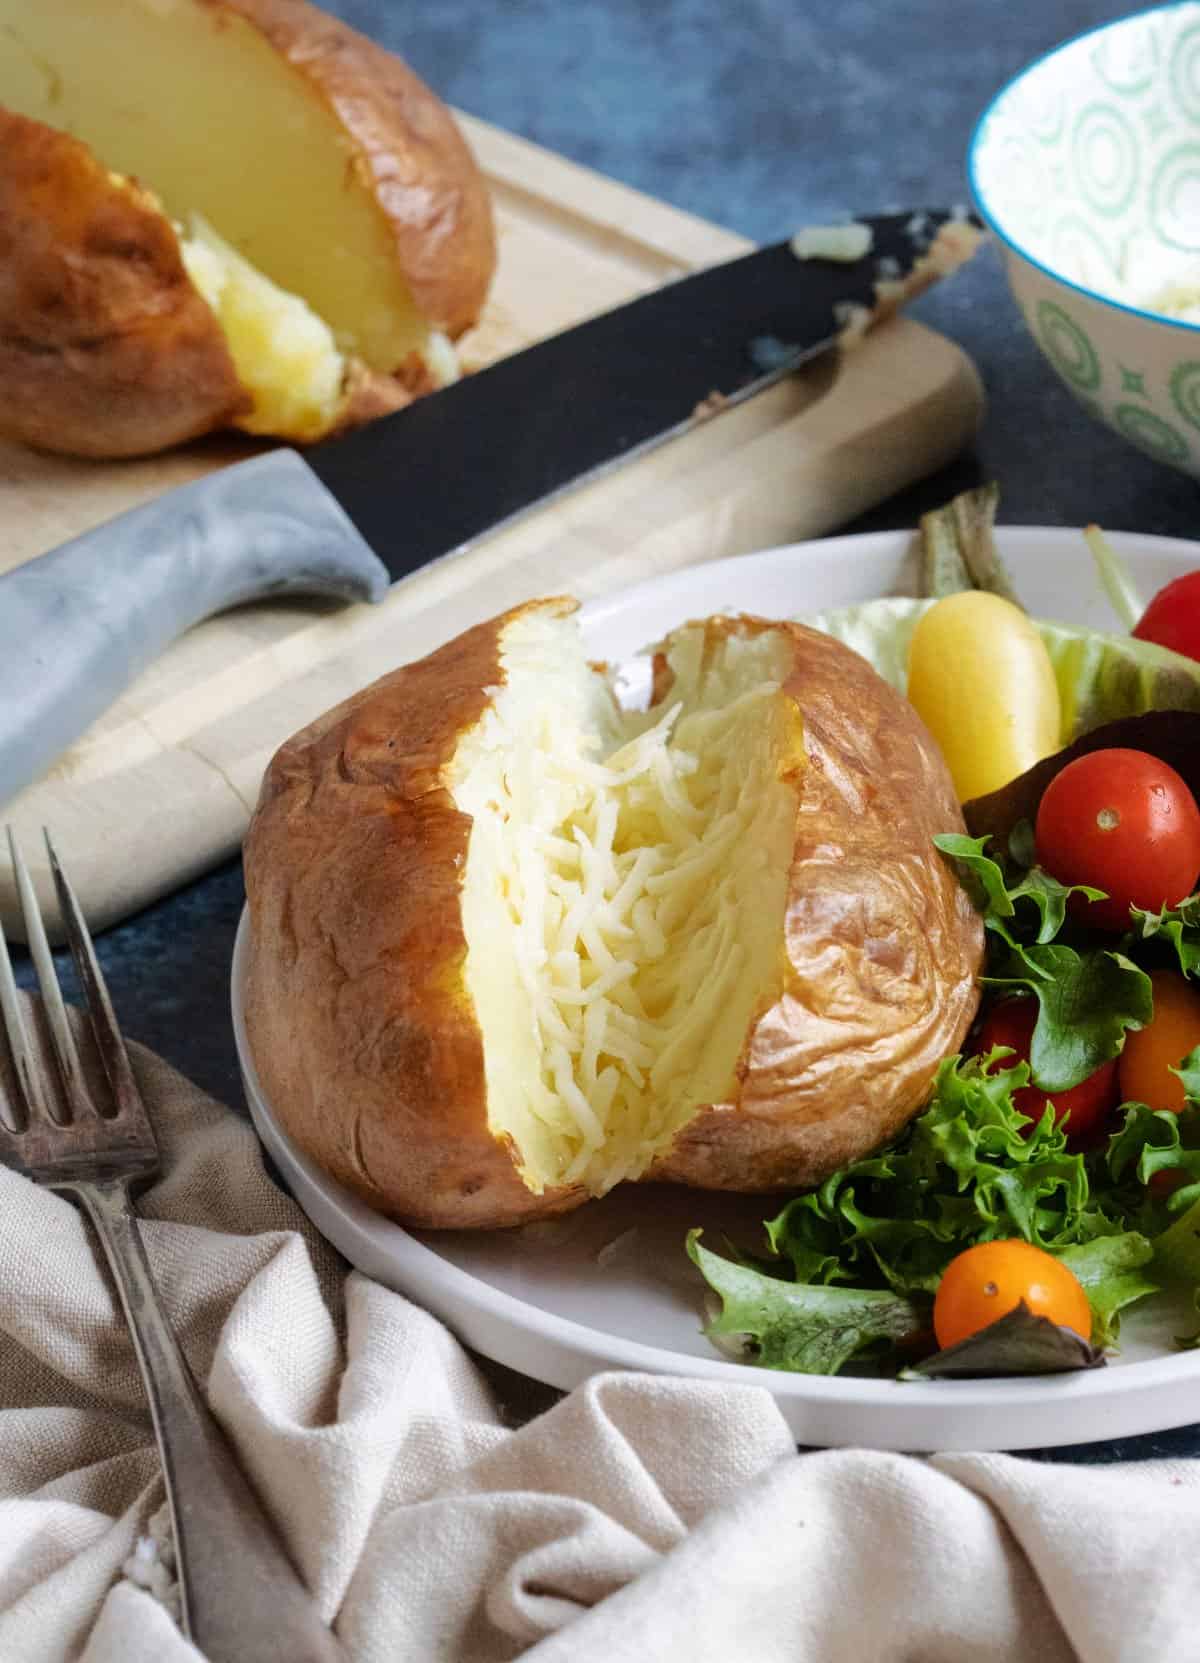 Air fryer baked potatoes served with a side salad.